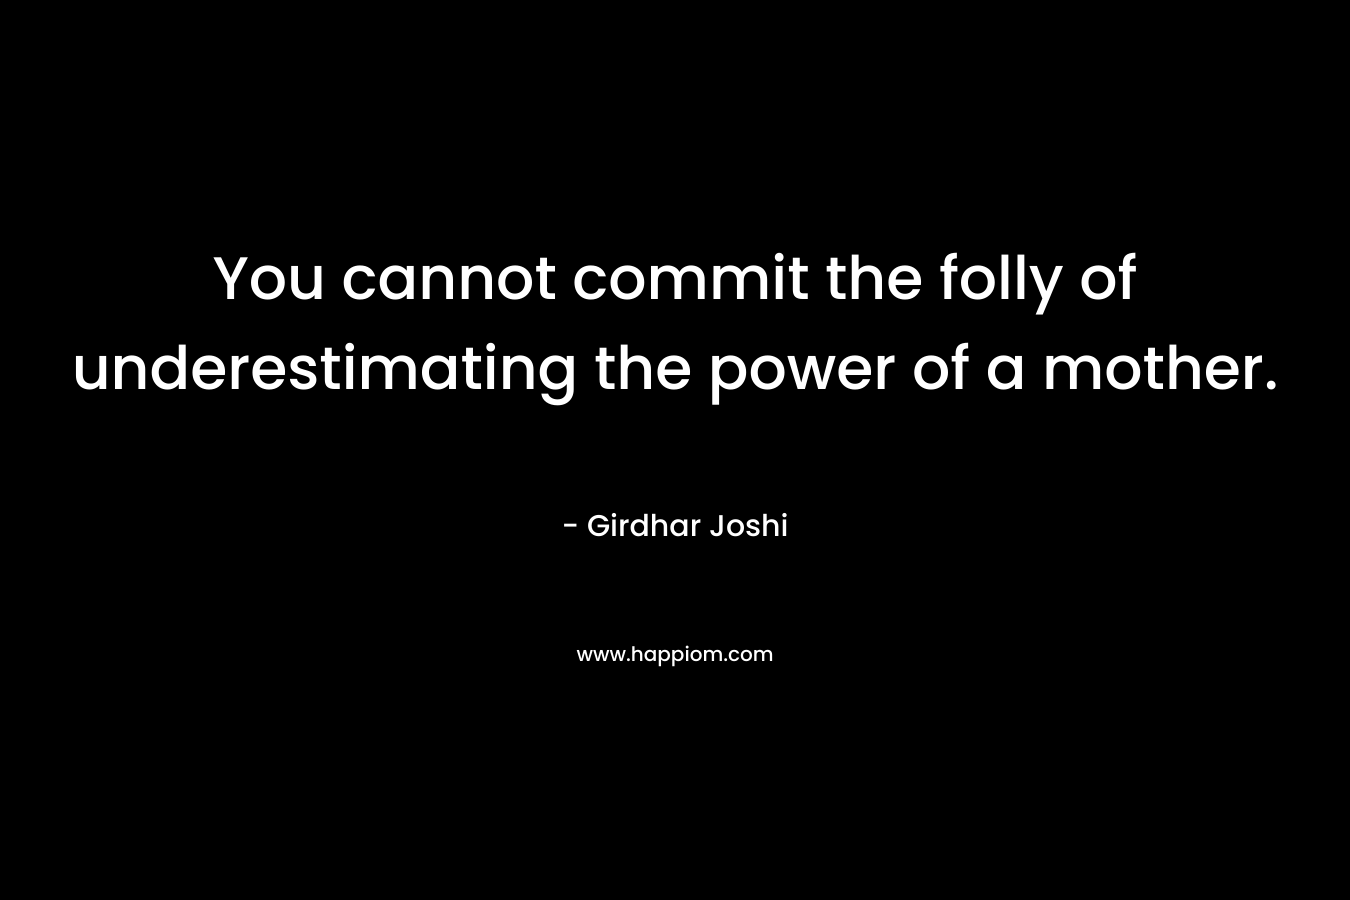 You cannot commit the folly of underestimating the power of a mother. – Girdhar Joshi